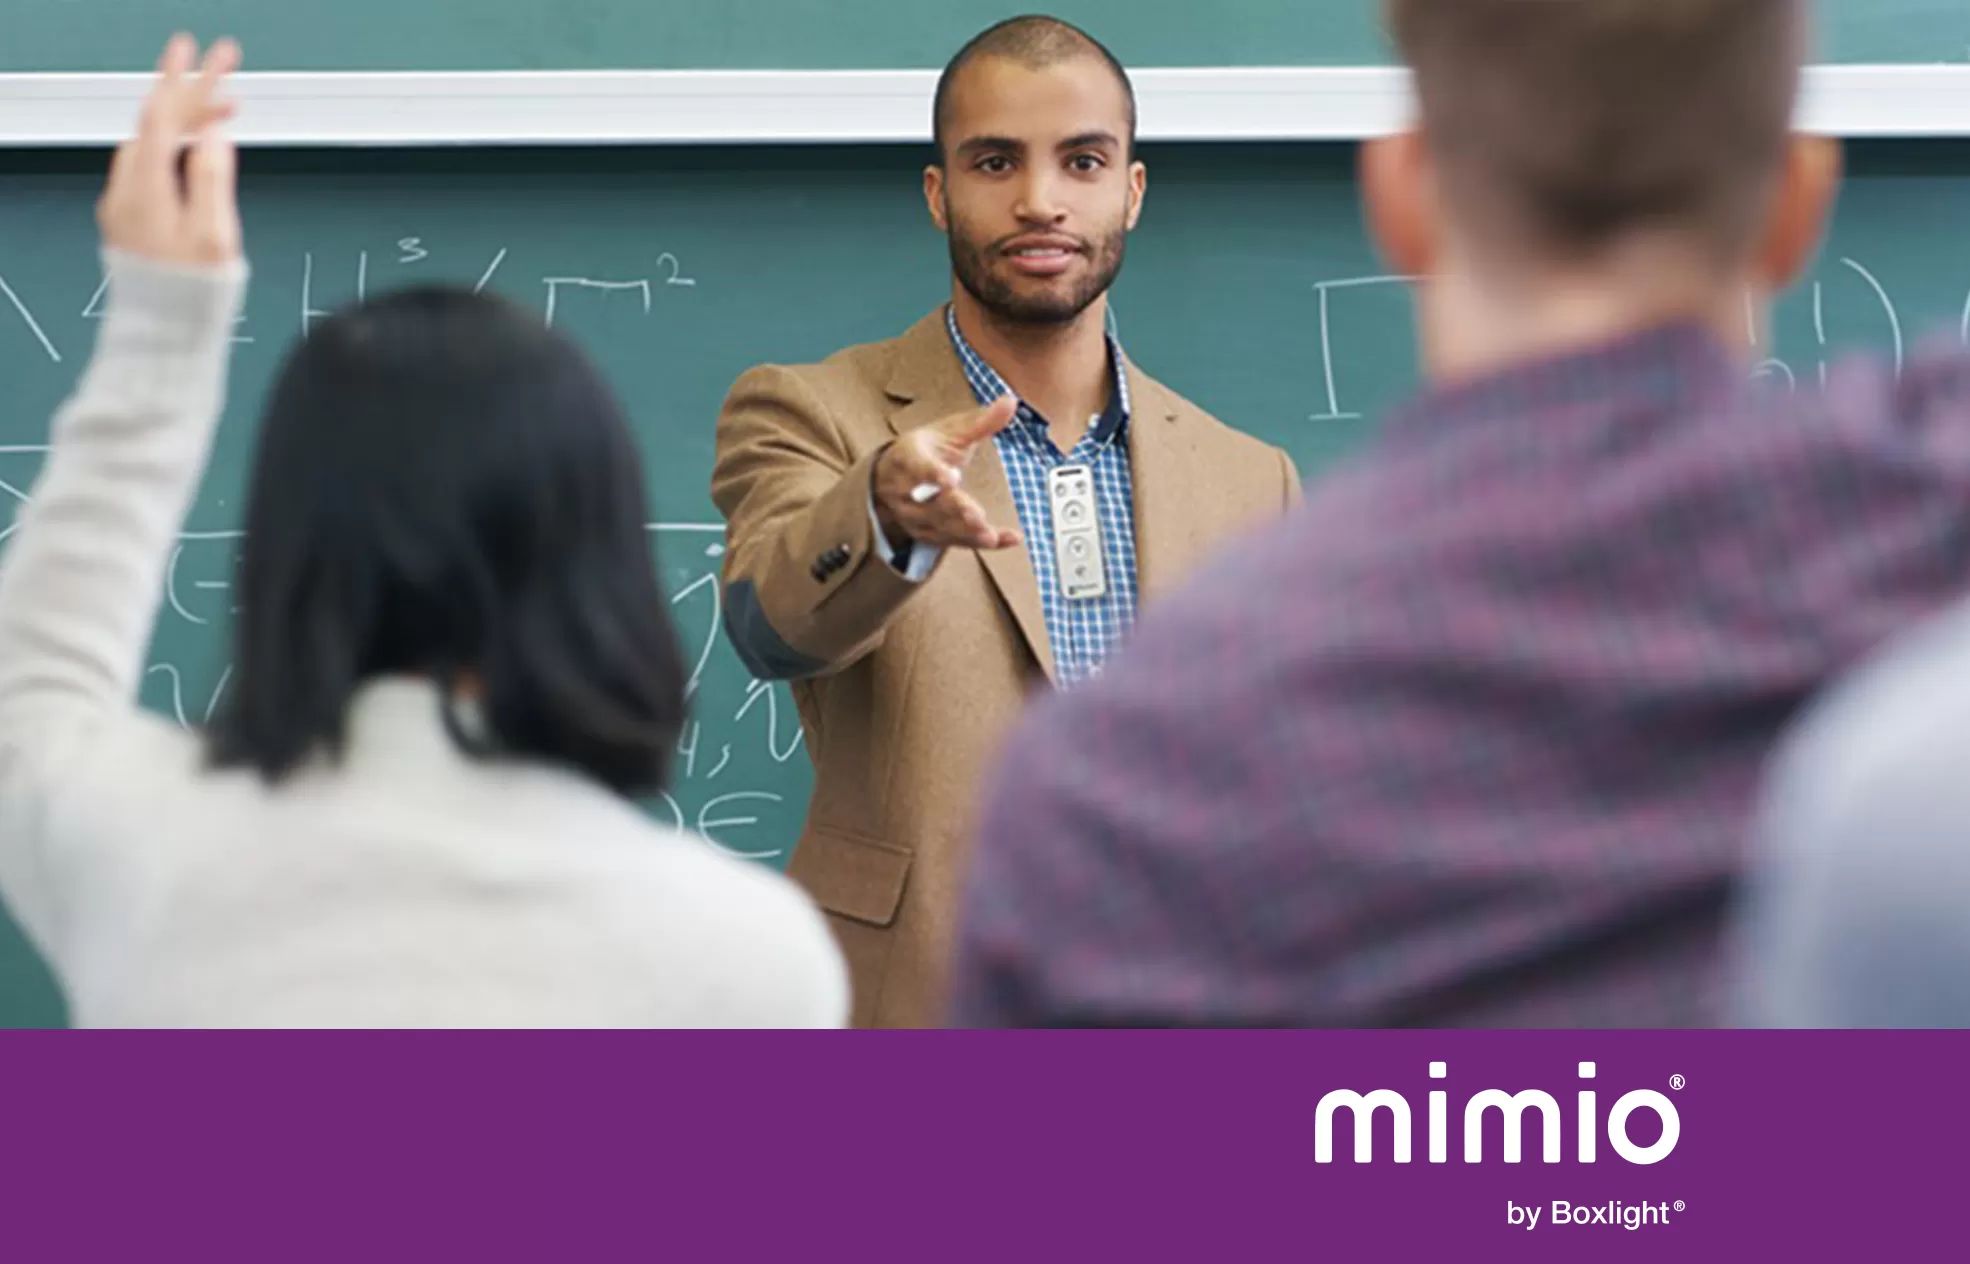 teacher using a MimioClarity microphone with purple banner saying 'mimio by Boxlight' at the bottom